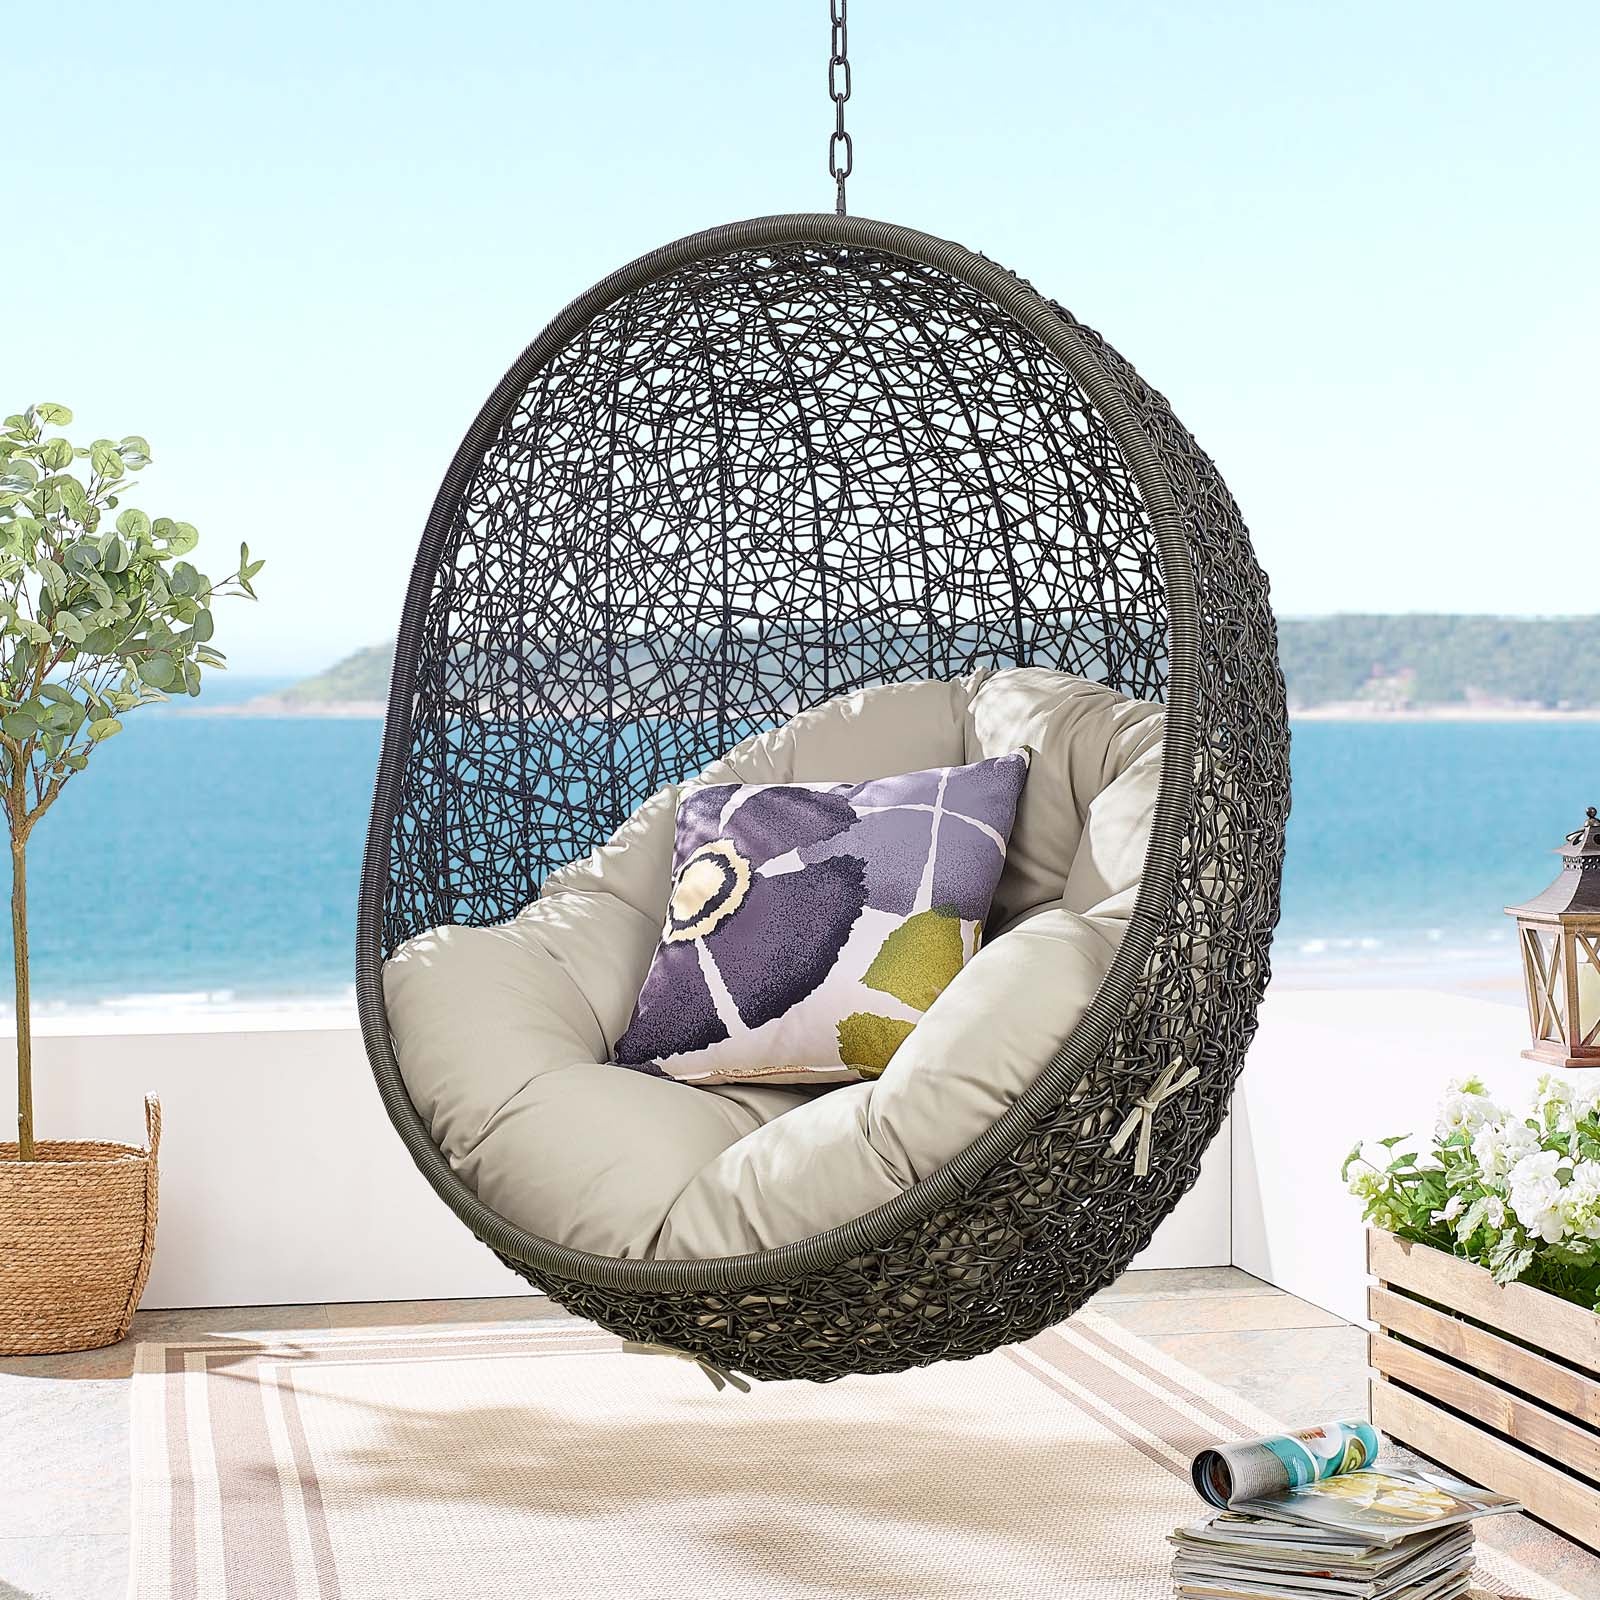 Swing Chair Essentials: Comfort, Design, and Durability插图3